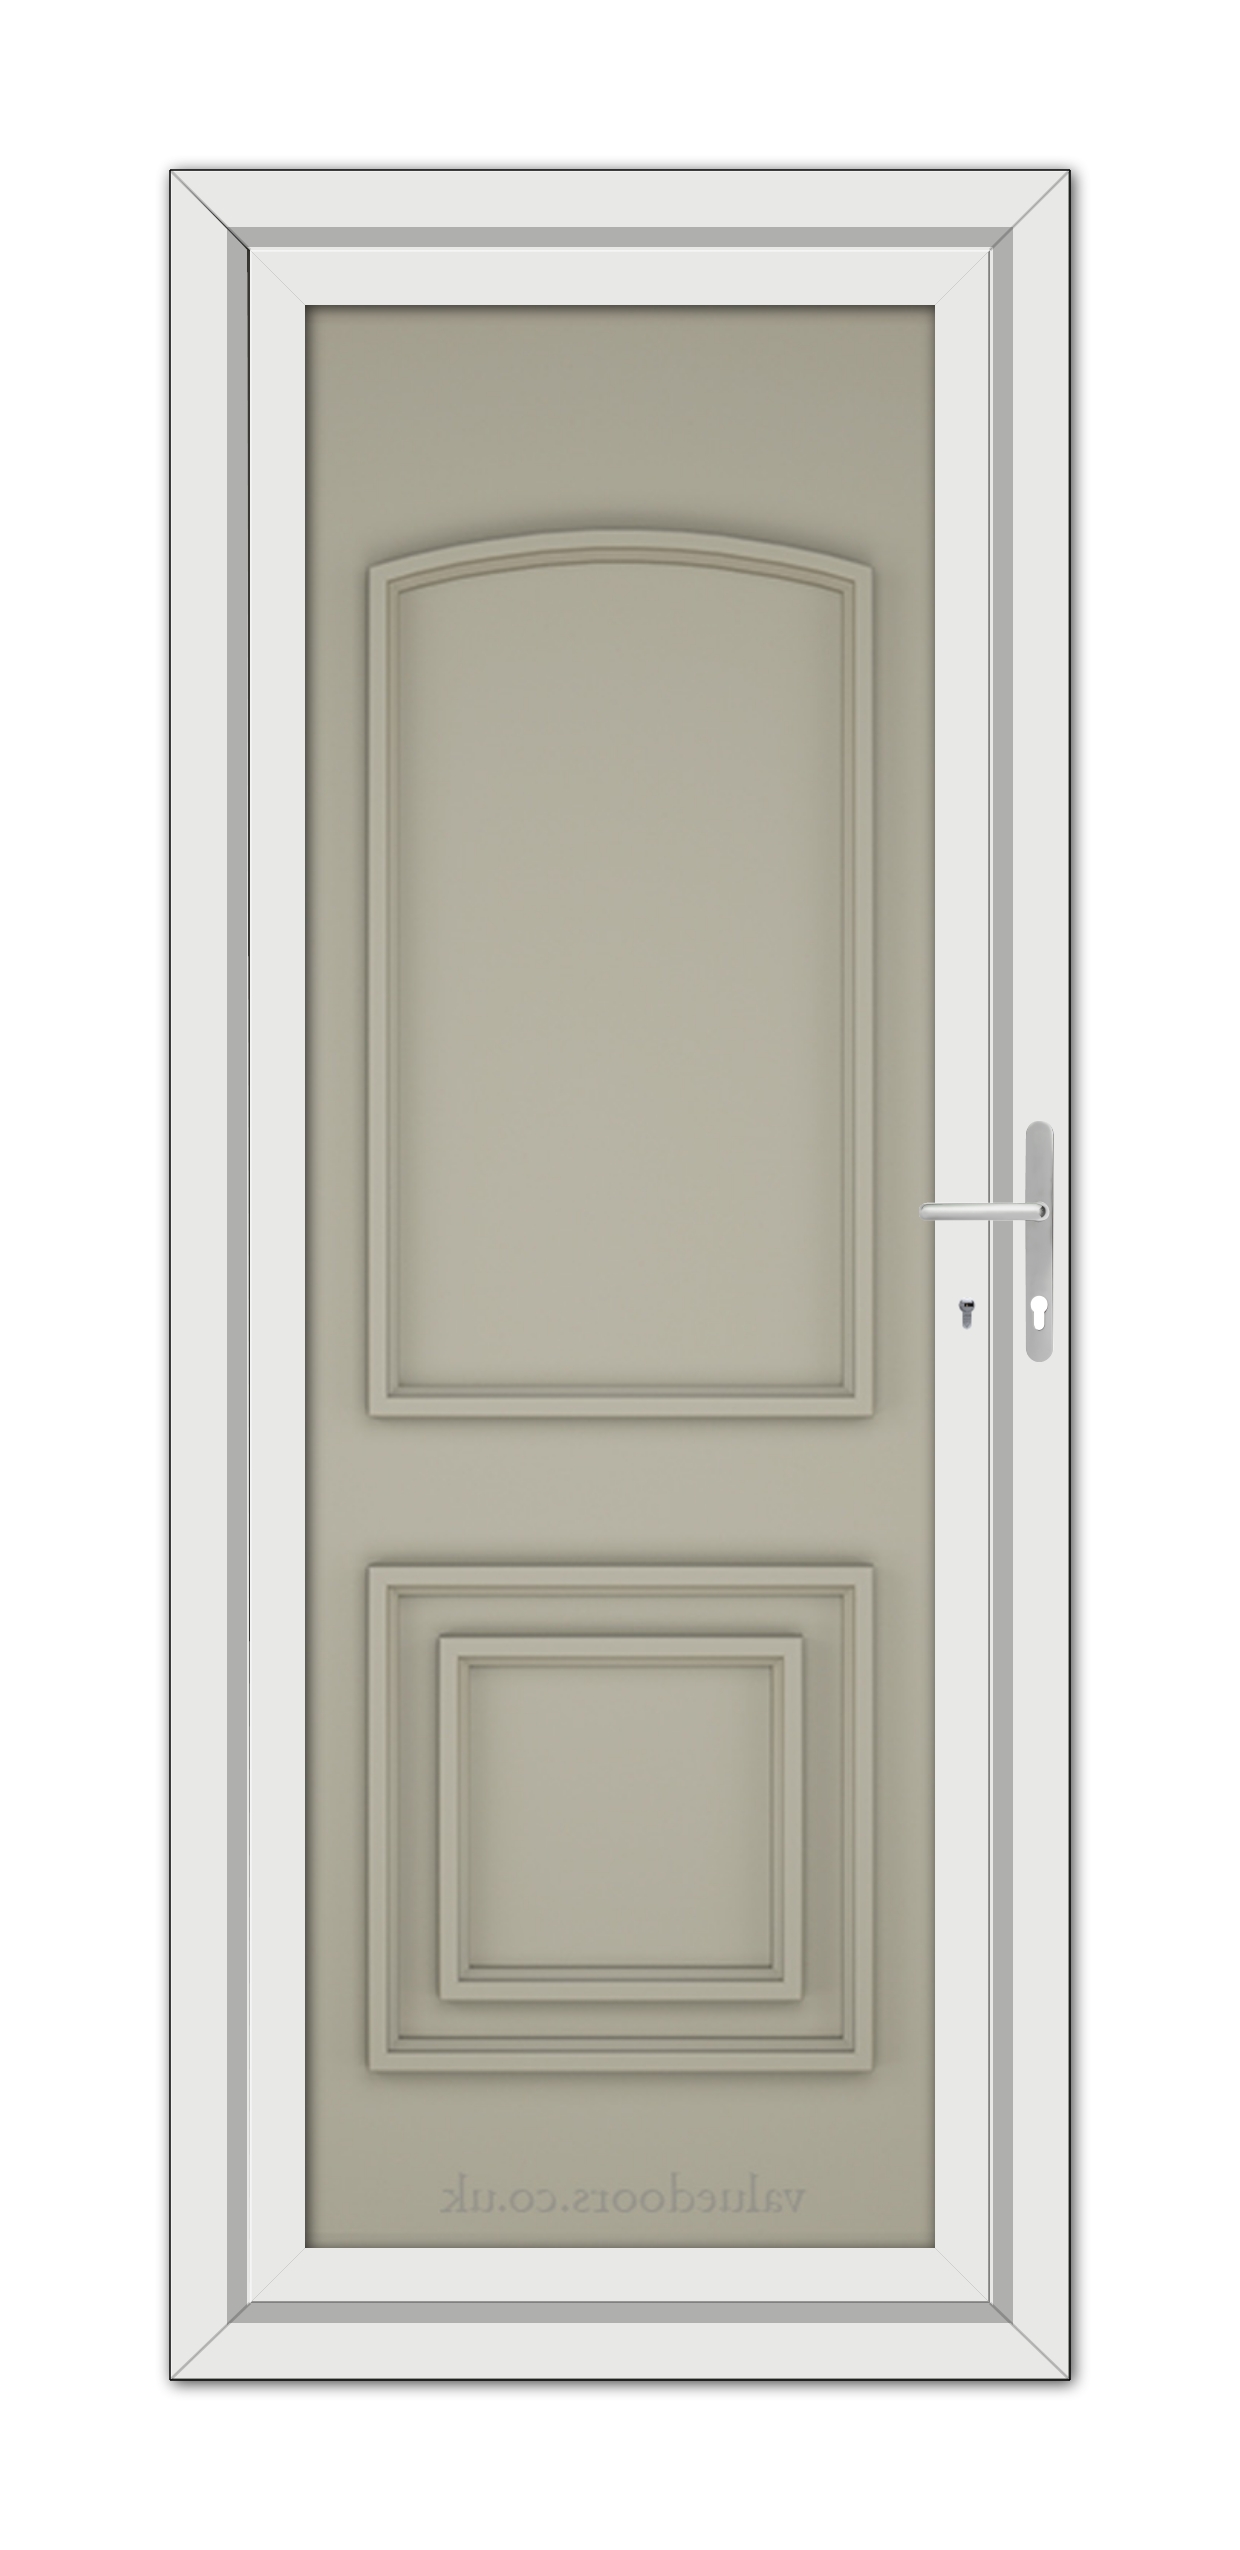 A modern Pebble Grey Balmoral Classic Solid uPVC Door in a white frame with a silver handle, featuring one large panel and one smaller inset panel in a neutral tone.